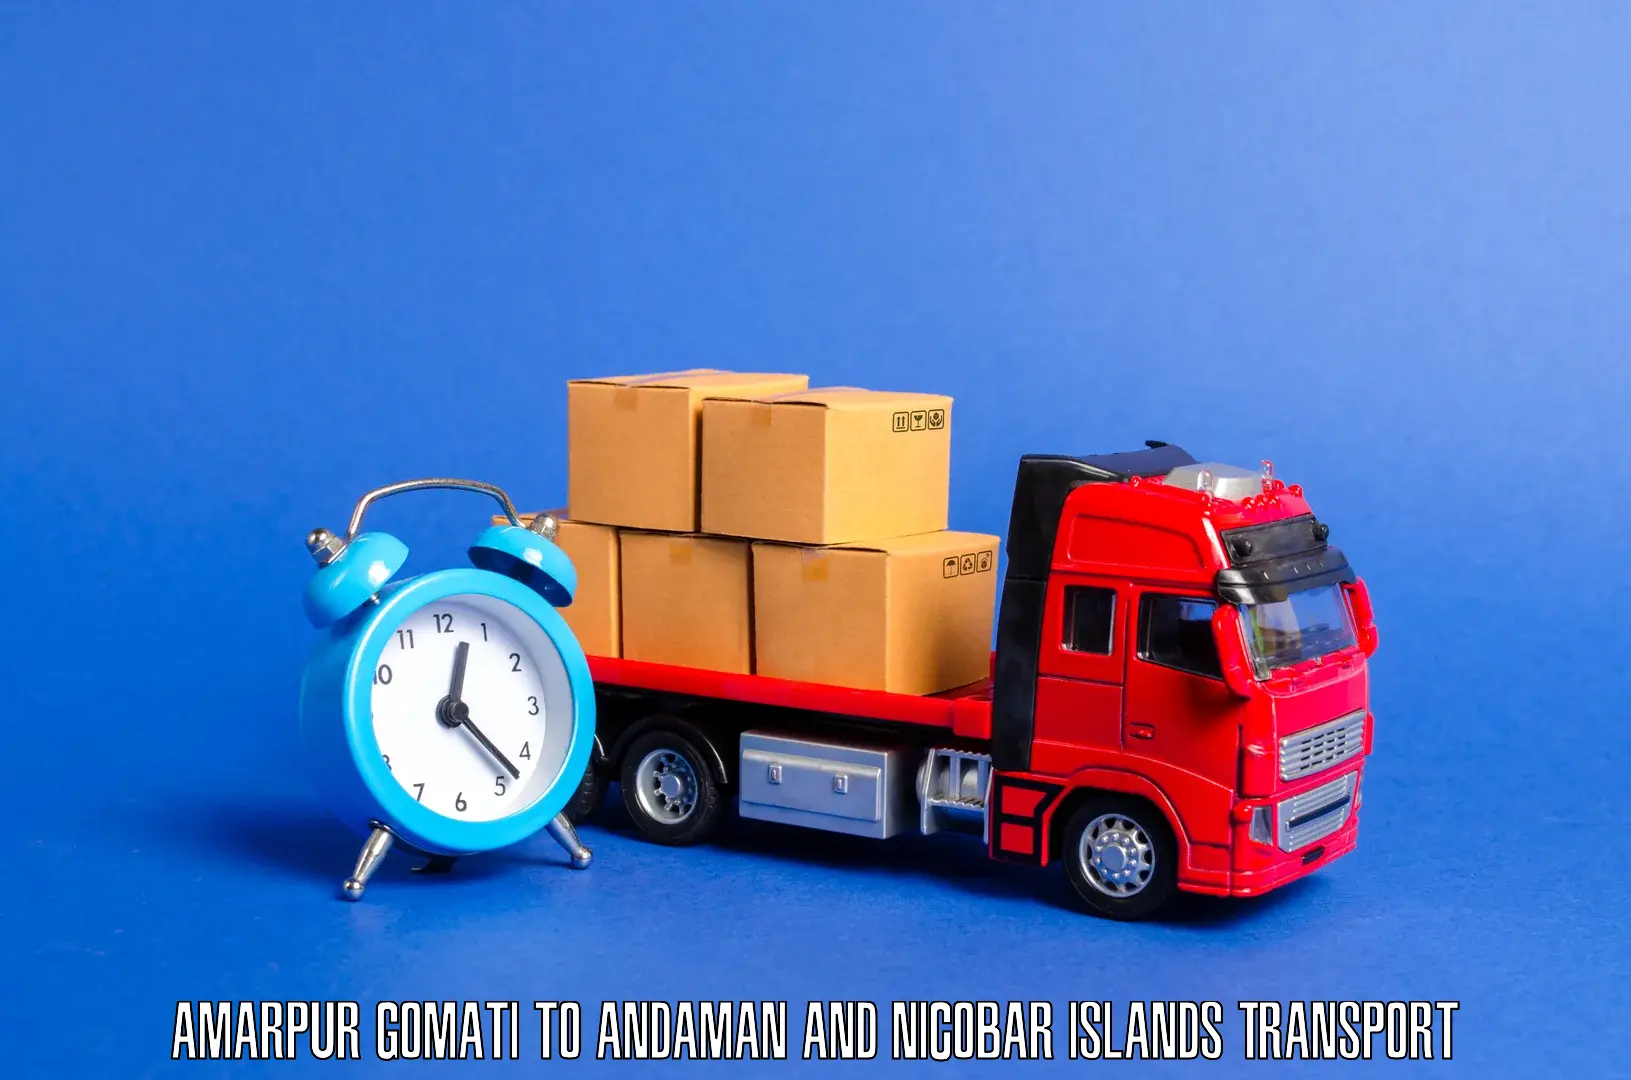 Commercial transport service Amarpur Gomati to Andaman and Nicobar Islands